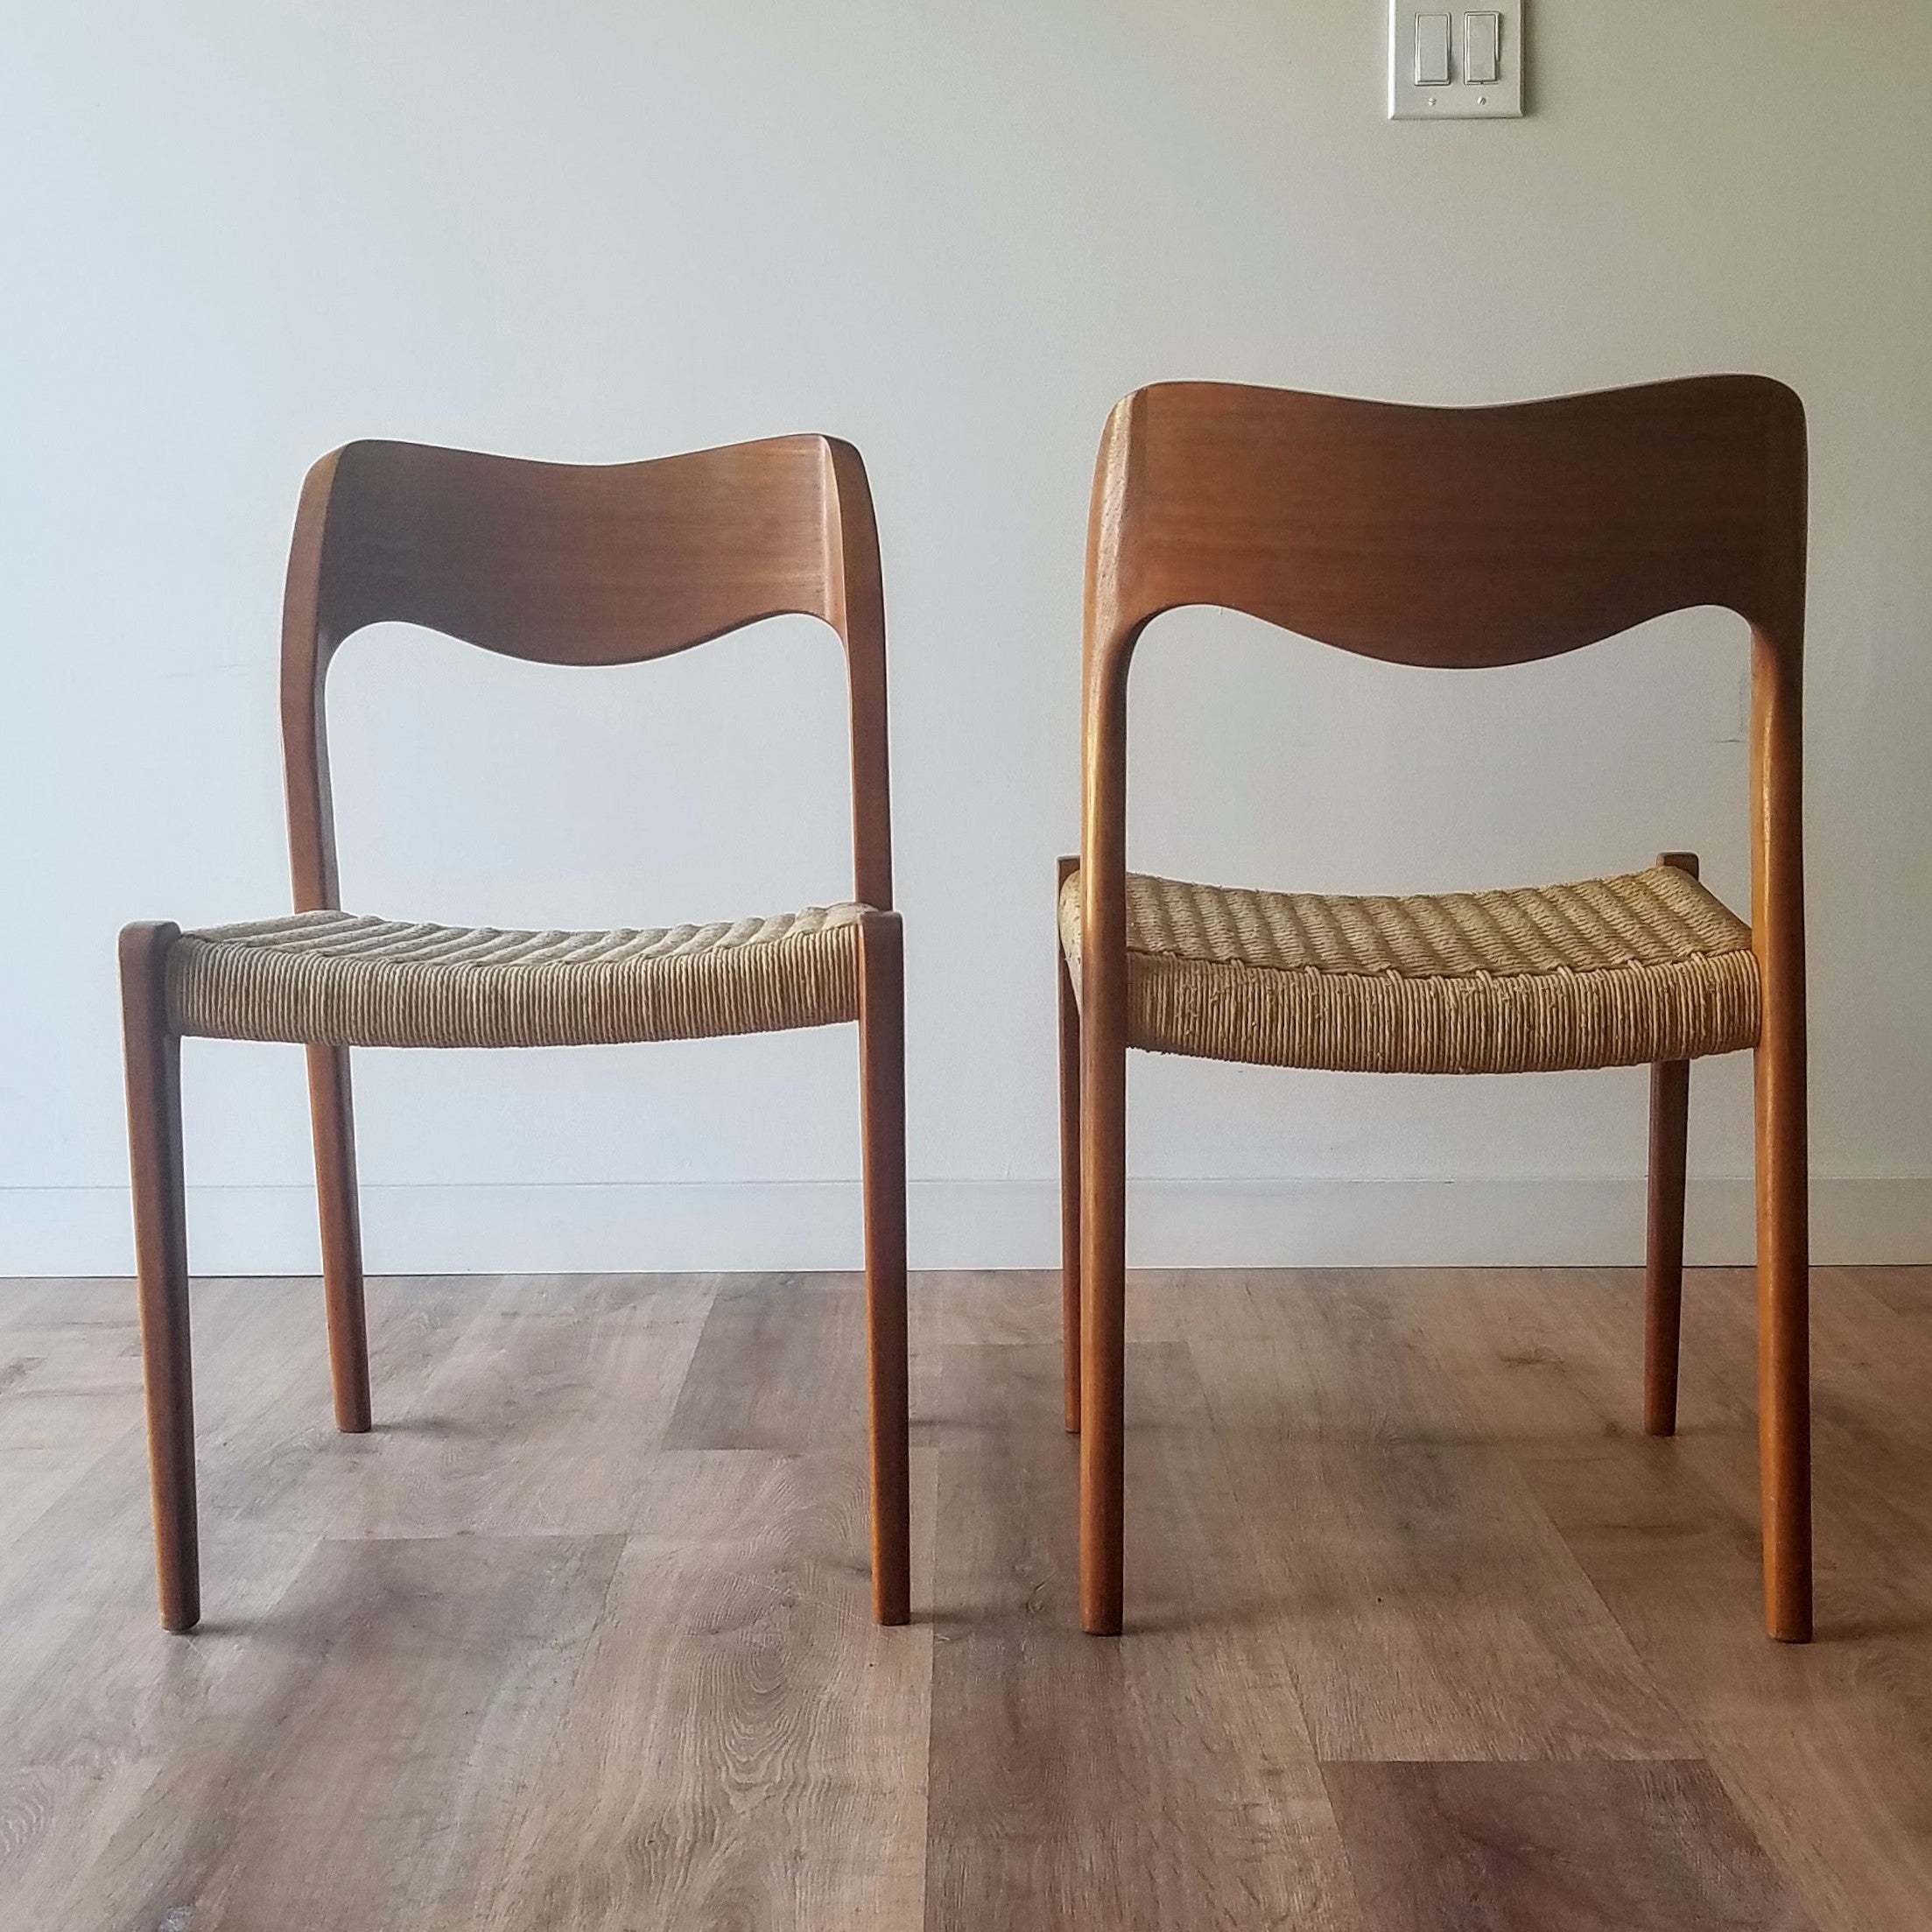 Front and back view of a Mid-Century Modern Dining Chairs (Model 71) designed by Niels Moller. Find this and other Scandinavian furniture at SPARKLEBARN in Ballard.